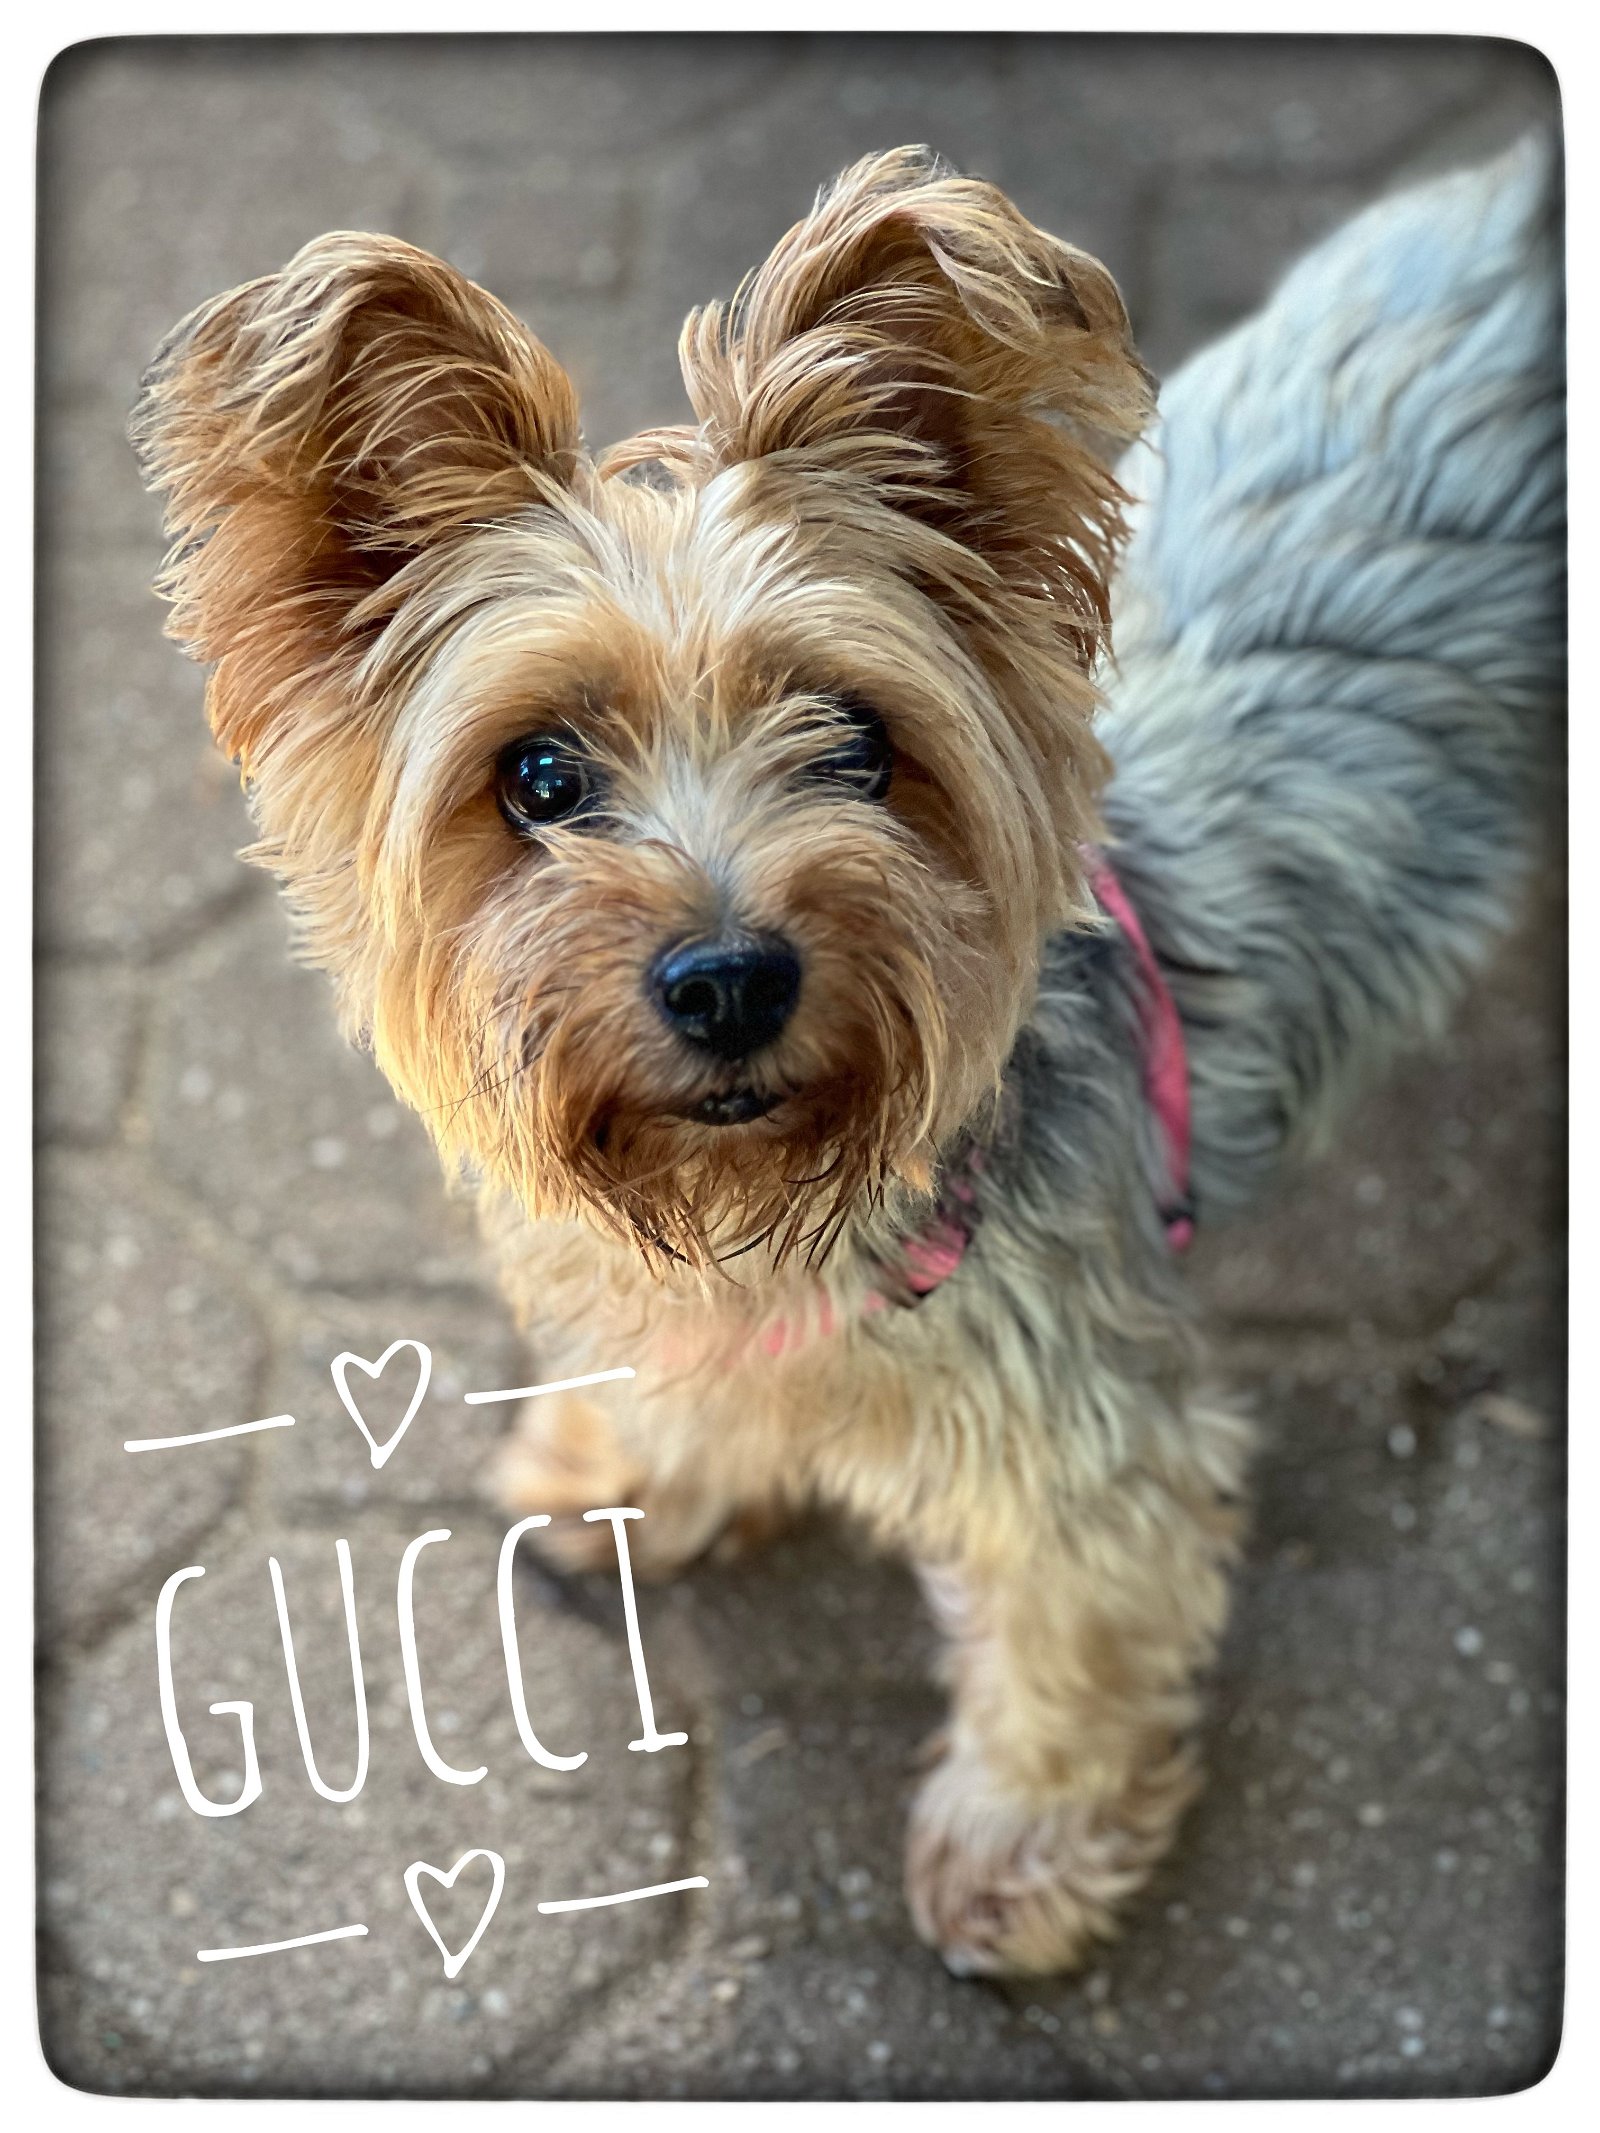 Dog for Adoption - Gucci, a Yorkshire Terrier Yorkie in North Sea